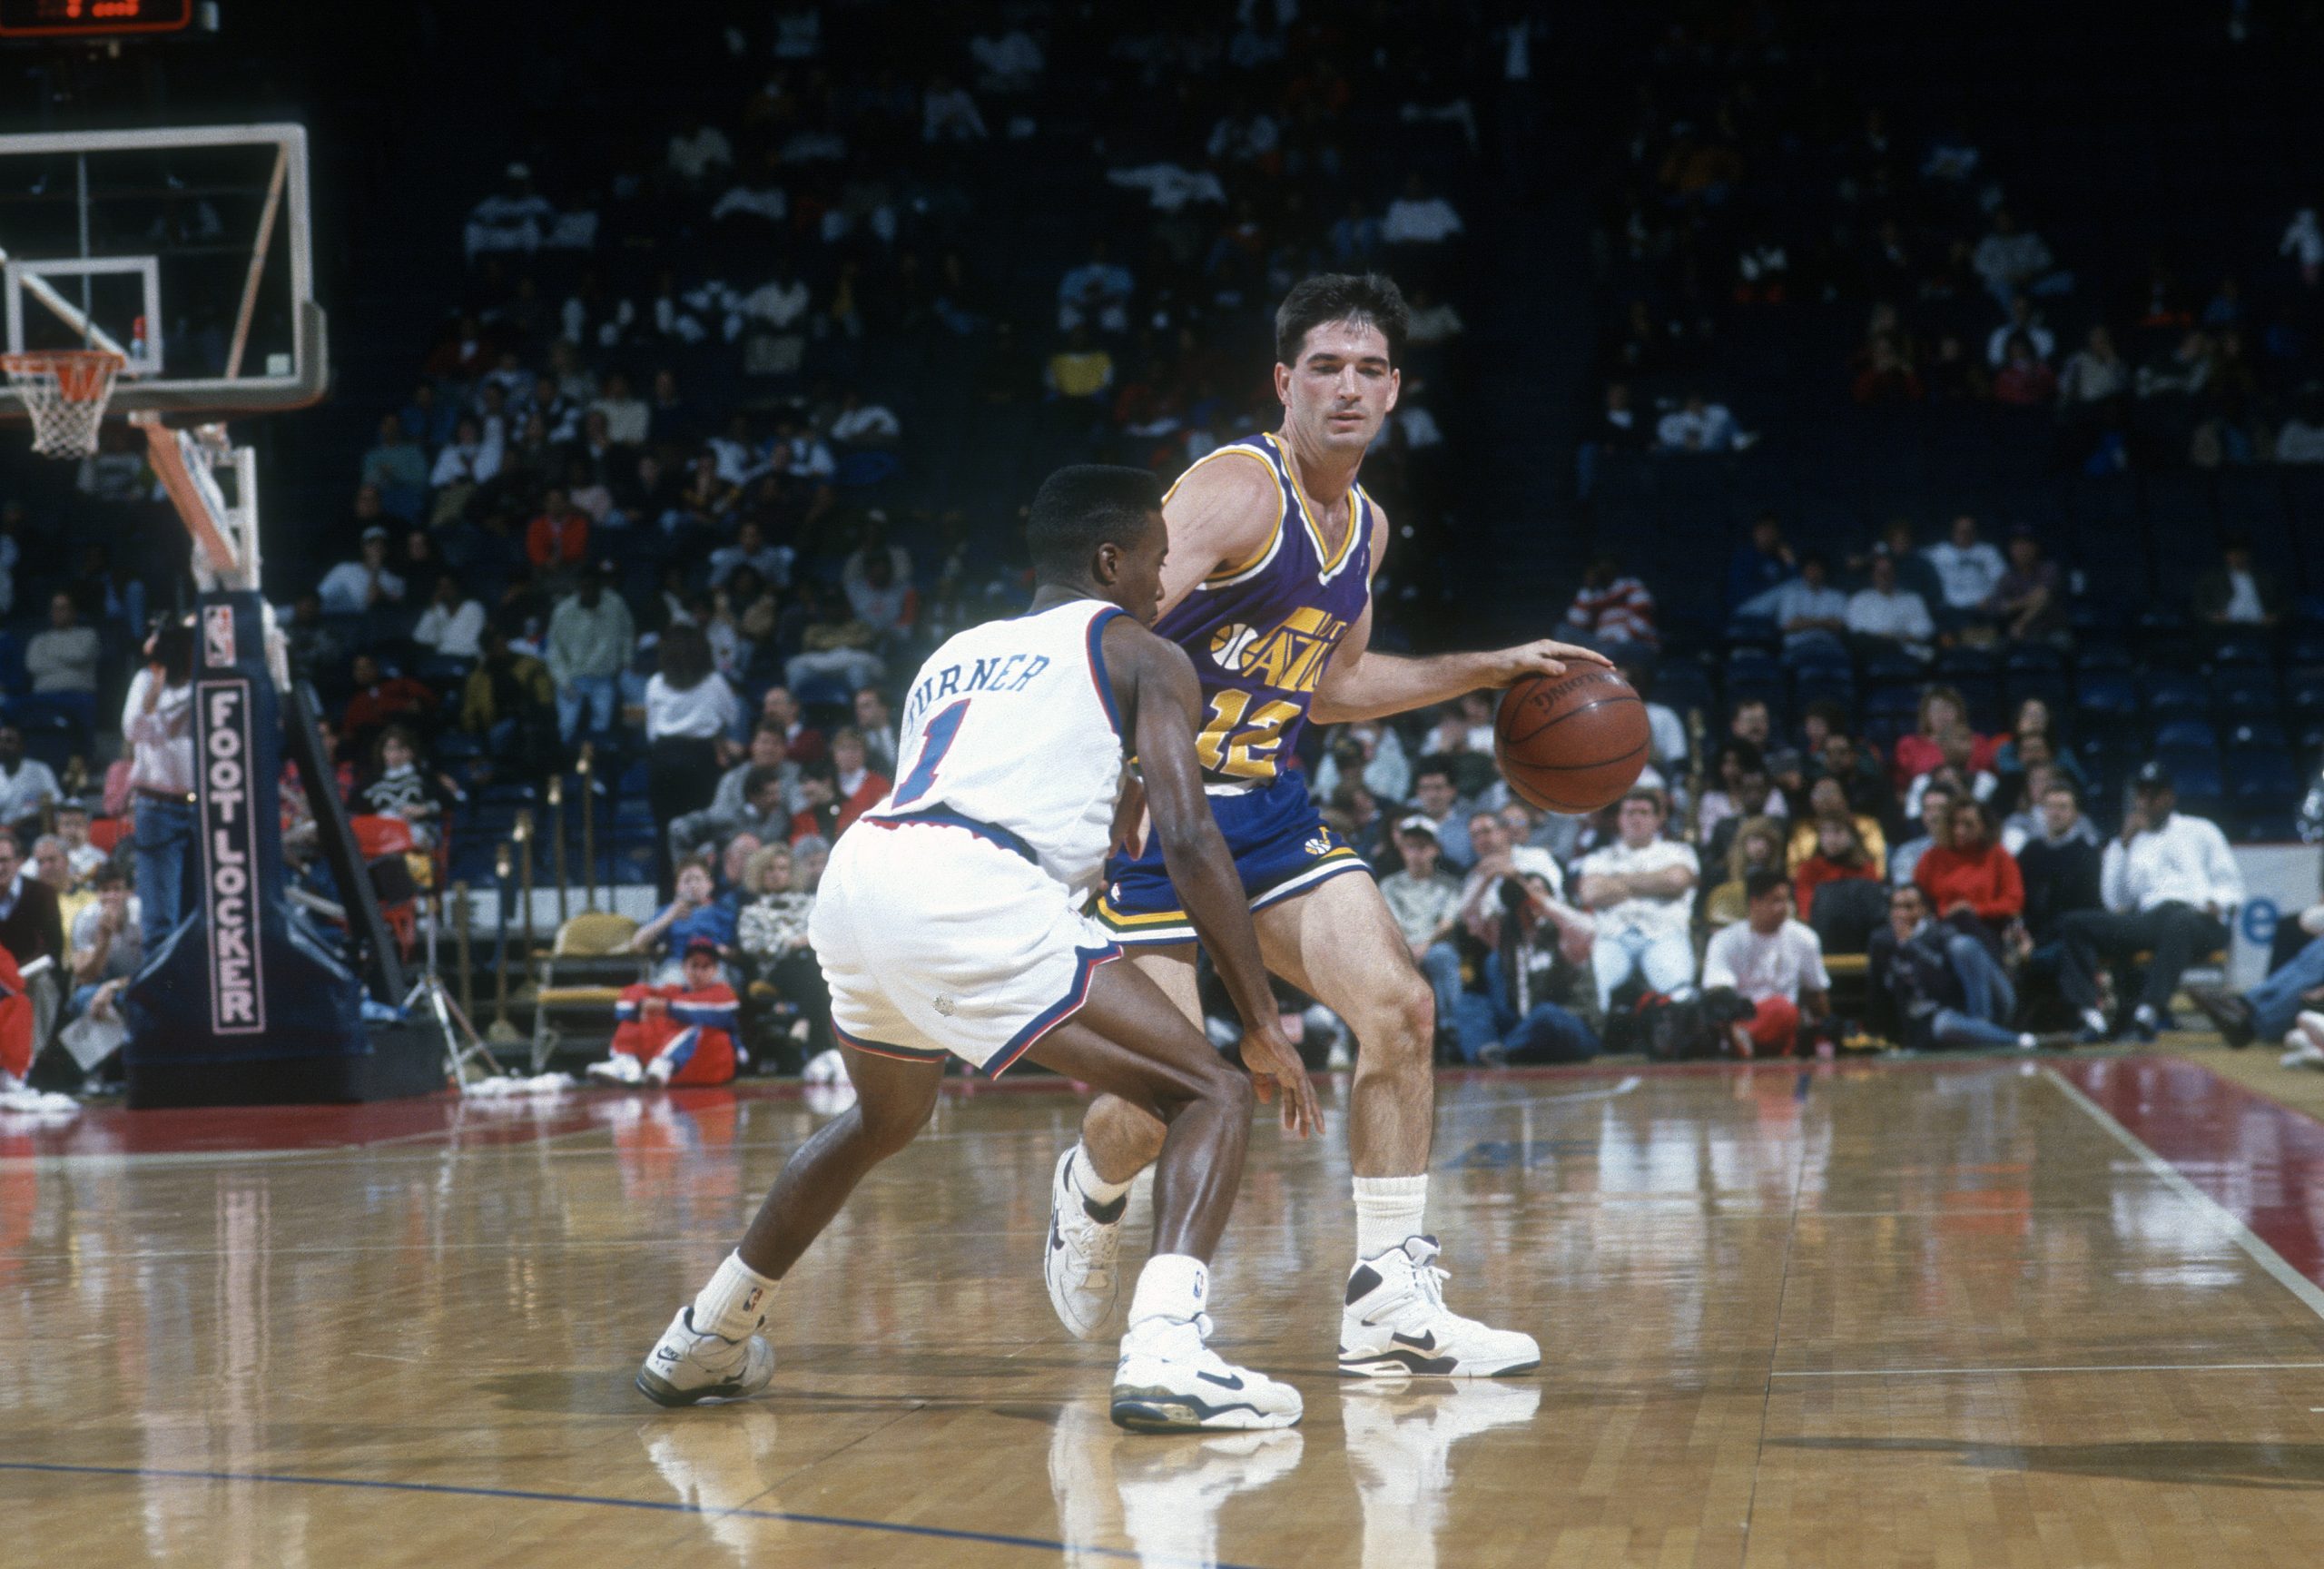 John Stockton’s Low Point With the 1984 Olympic Team Triggered His Hall of Fame NBA Career